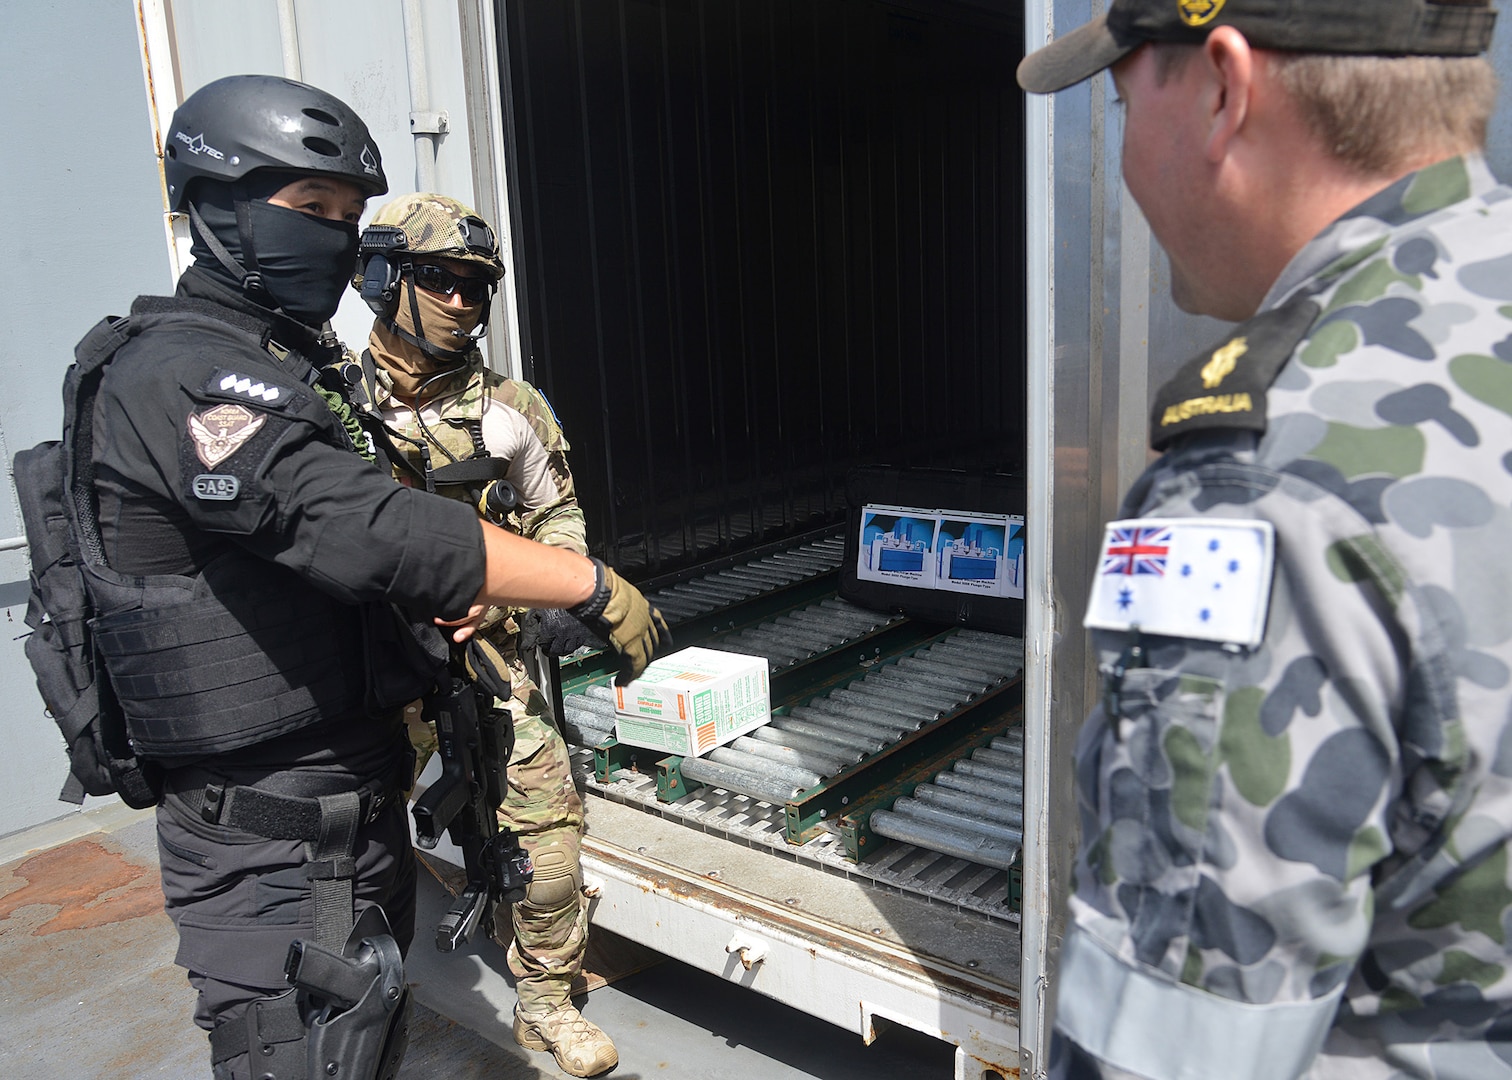 PACIFIC OCEAN (Aug. 6, 2014) A Republic of Korea (ROK) Coastguard and a ROK Navy Sailor question Able Seaman Grahame Kelaher about a mock electronic discharge machine they found in a conex container on USNS Henry J. Kaiser (T-AO 187) during a live exercise for Fortune Guard 2014. Fortune Guard is the region’s premier exercise designed to build regional weapons of mass destruction counter-proliferation capacity and long-term commitment to the proliferation security initiative in the Indo-Asia-Pacific. (U.S. Navy photo by Mass Communication Specialist 1st class Amanda Dunford/Released).